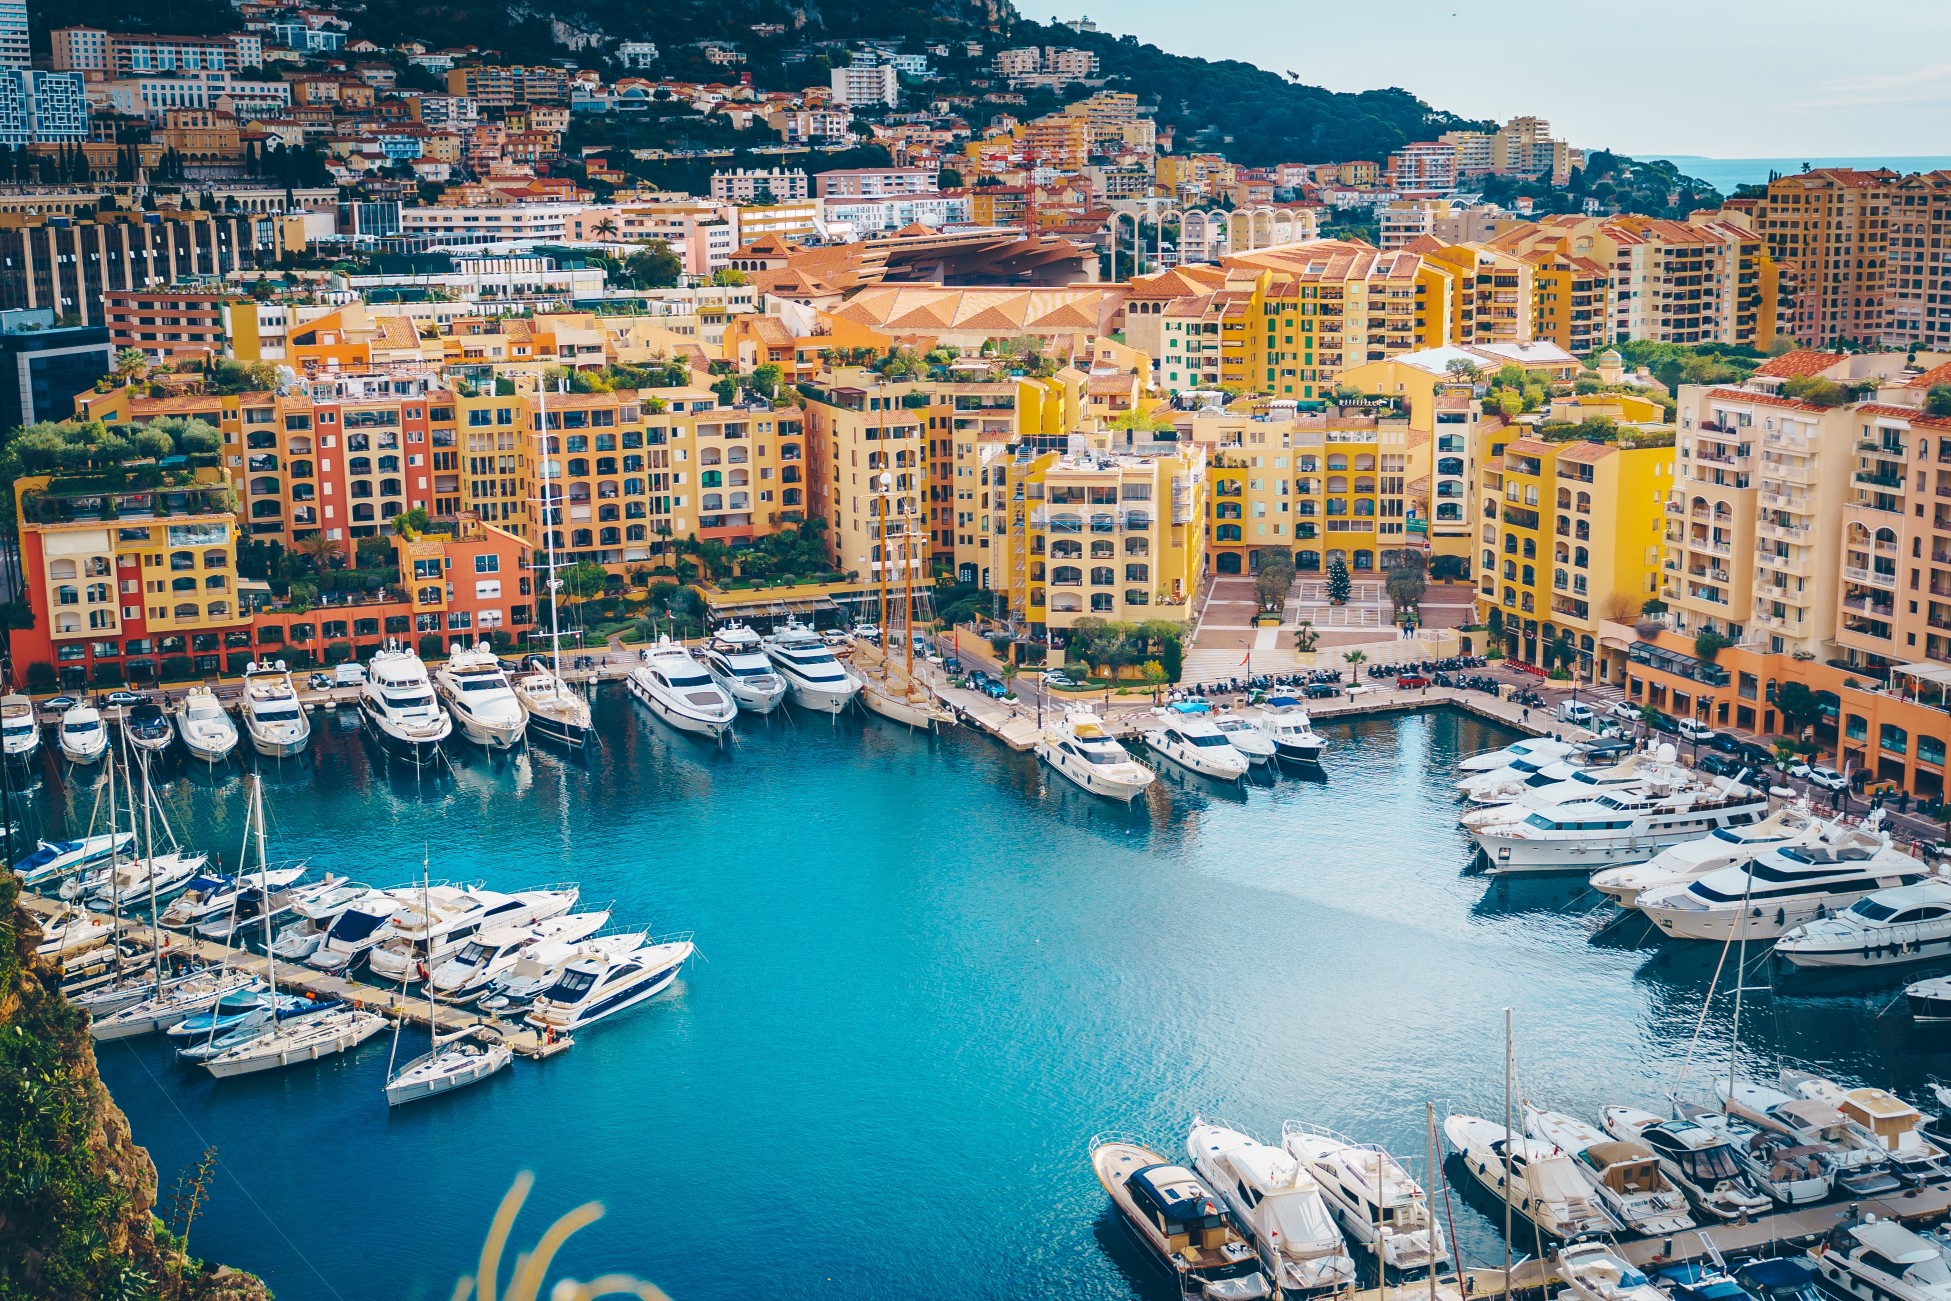 Is French Riviera worth visiting?